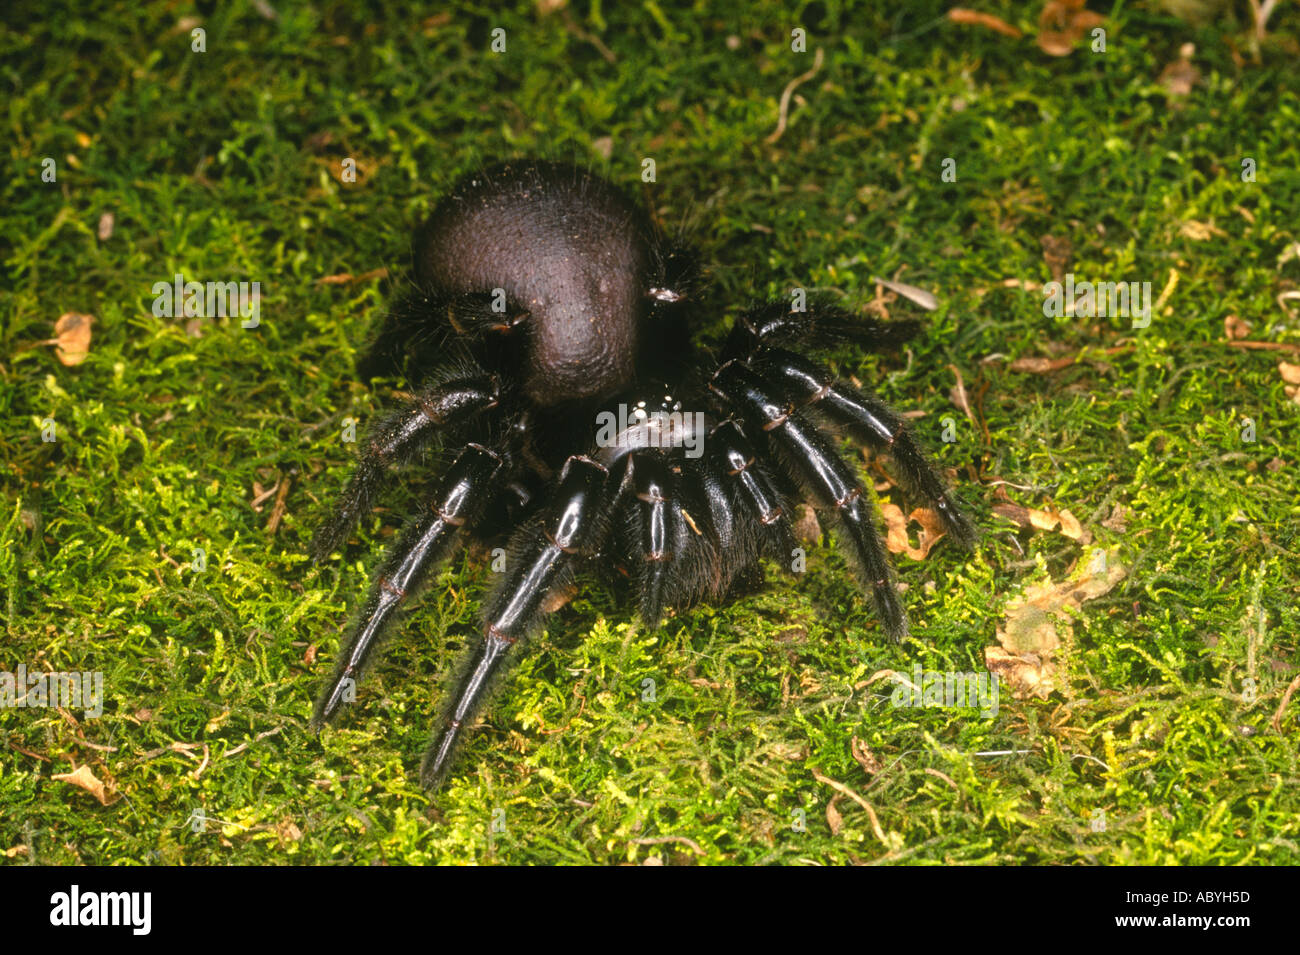 Sydney Funnel Web Spider, Atrax robustus . These spiders are renowned for their highly toxic and fast acting venom. Stock Photo